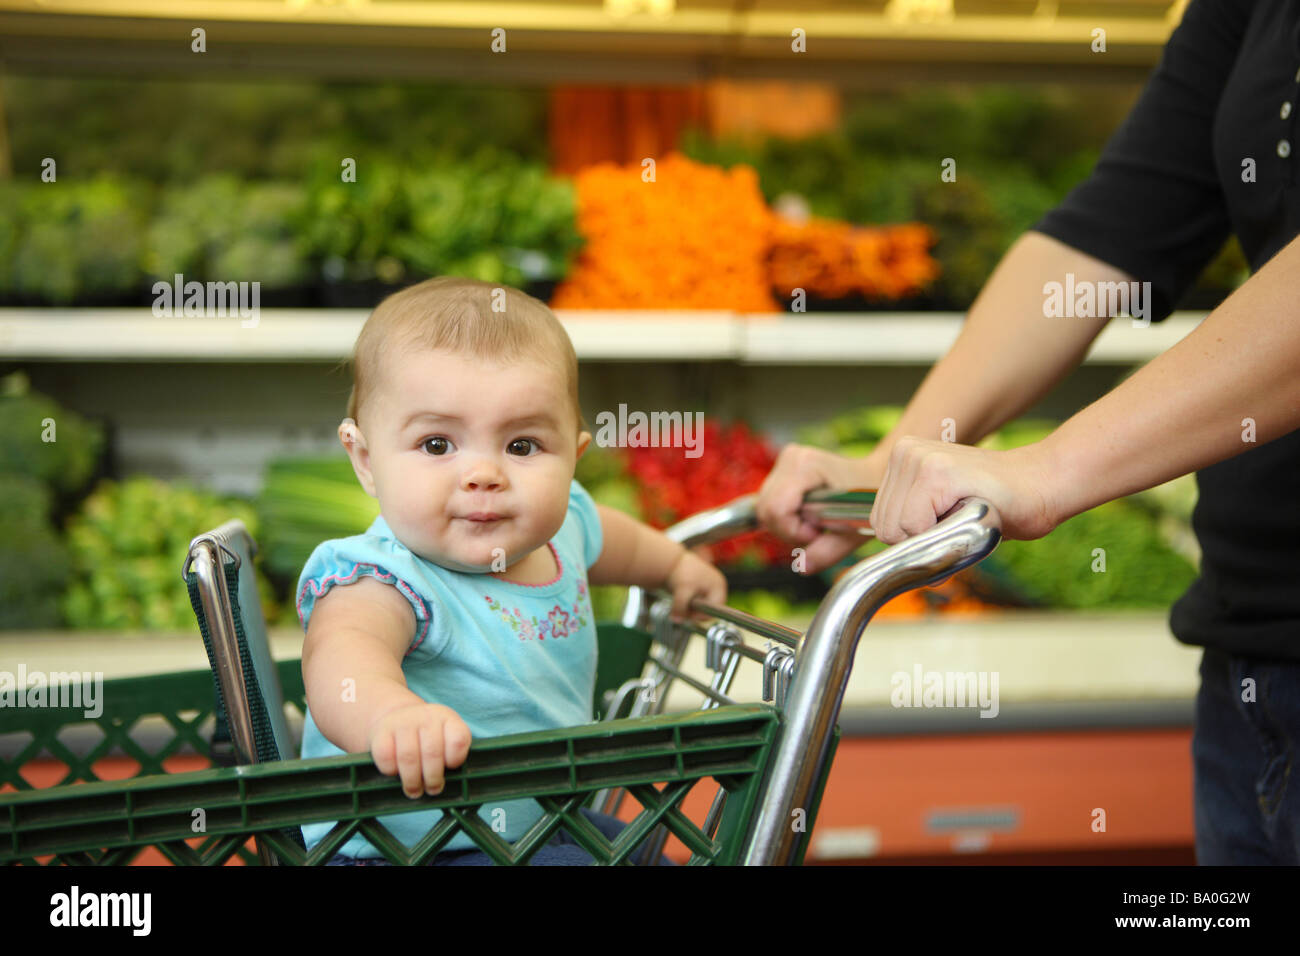 Baby in shopping cart in produce section of grocery store Stock Photo